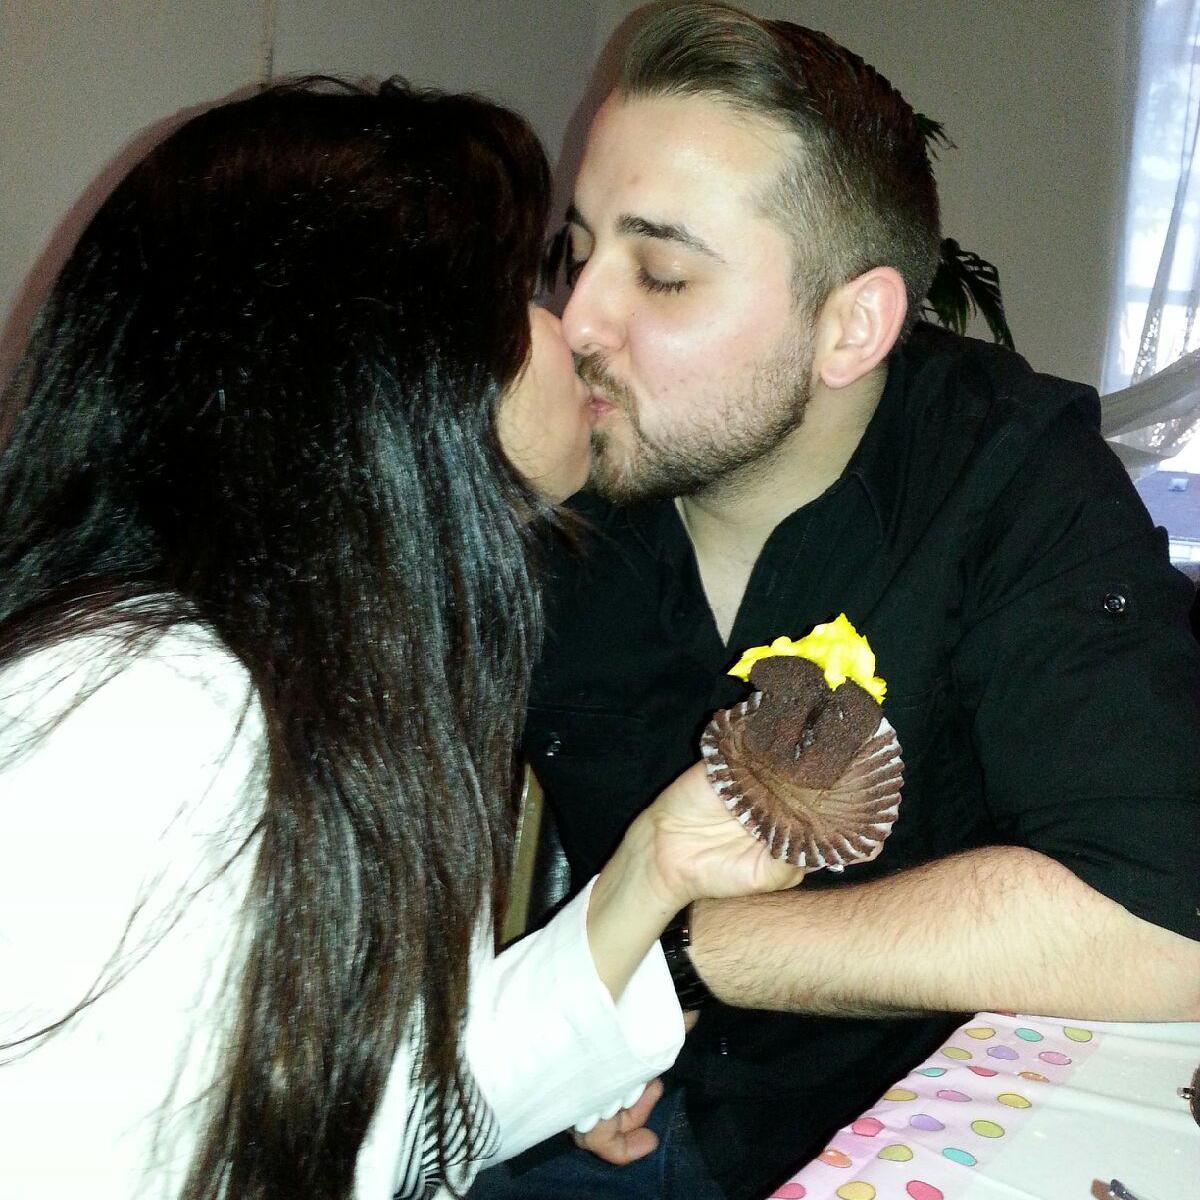 Kissing and eating cupcakes at Lola Grace's 1st birthday party!